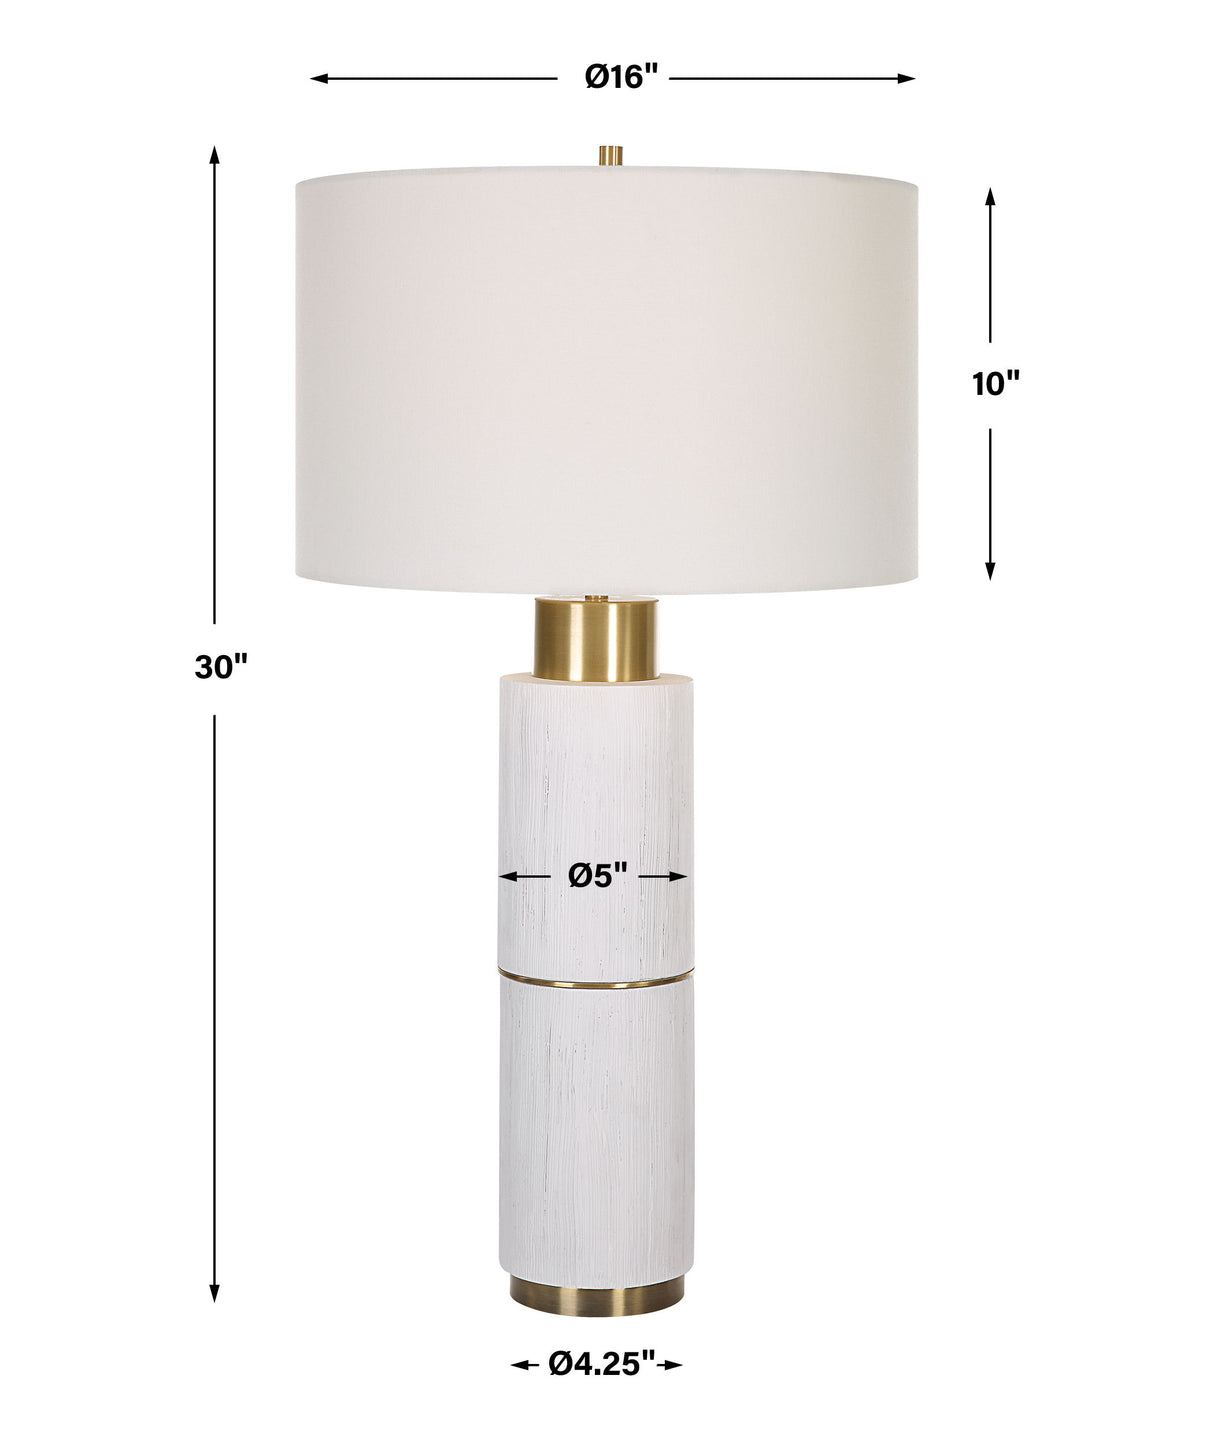 Ruse - Whitewashed Table Lamp